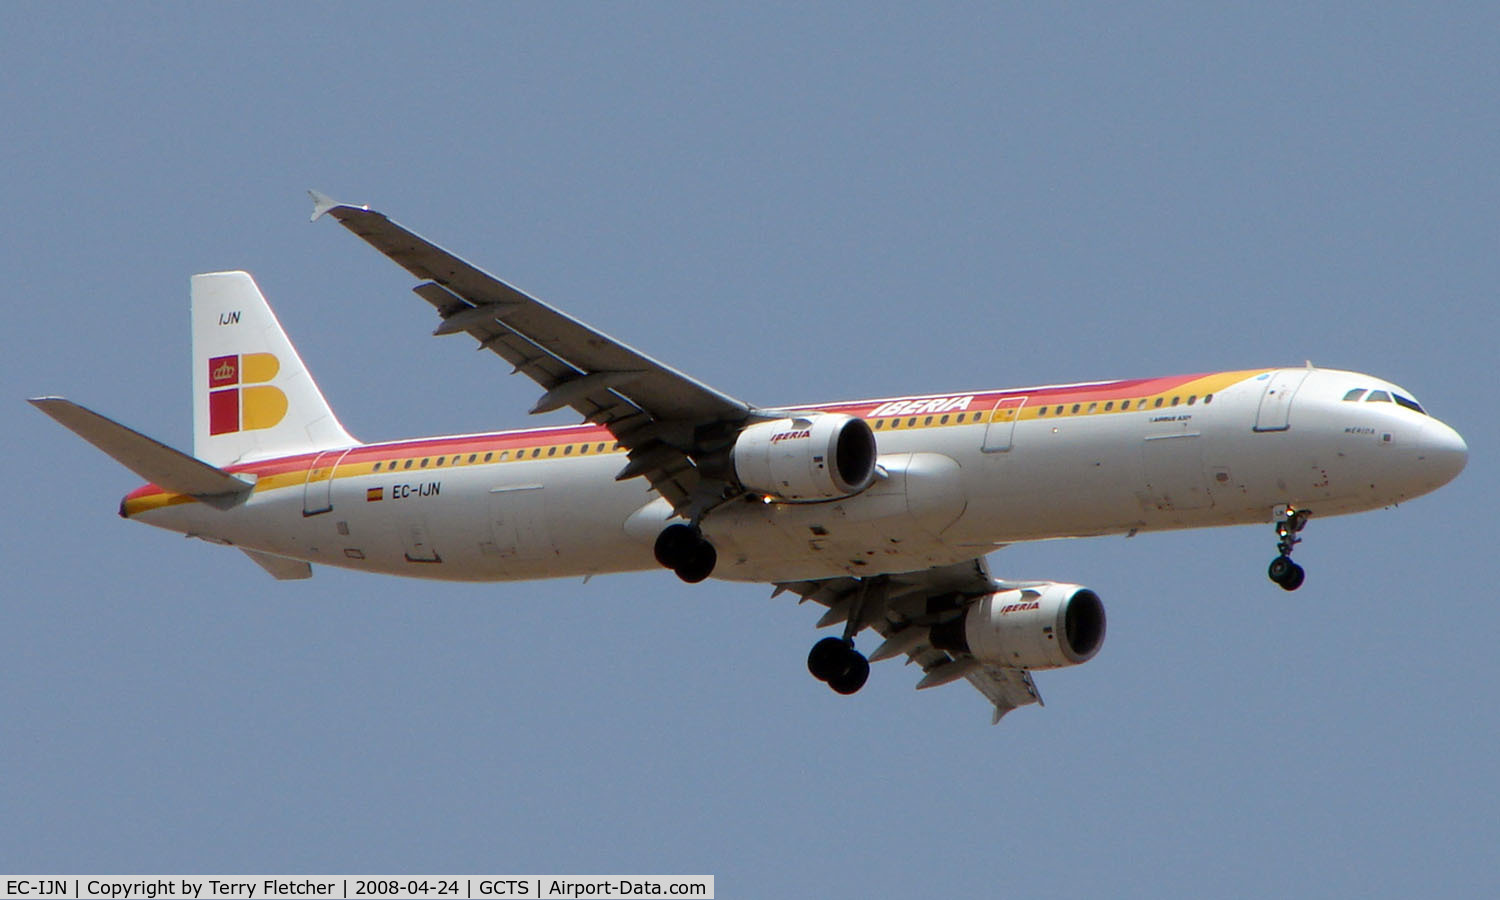 EC-IJN, 2002 Airbus A321-211 C/N 1836, Iberia A321 on the lunchtime arrival into Tenerife South from Madrid